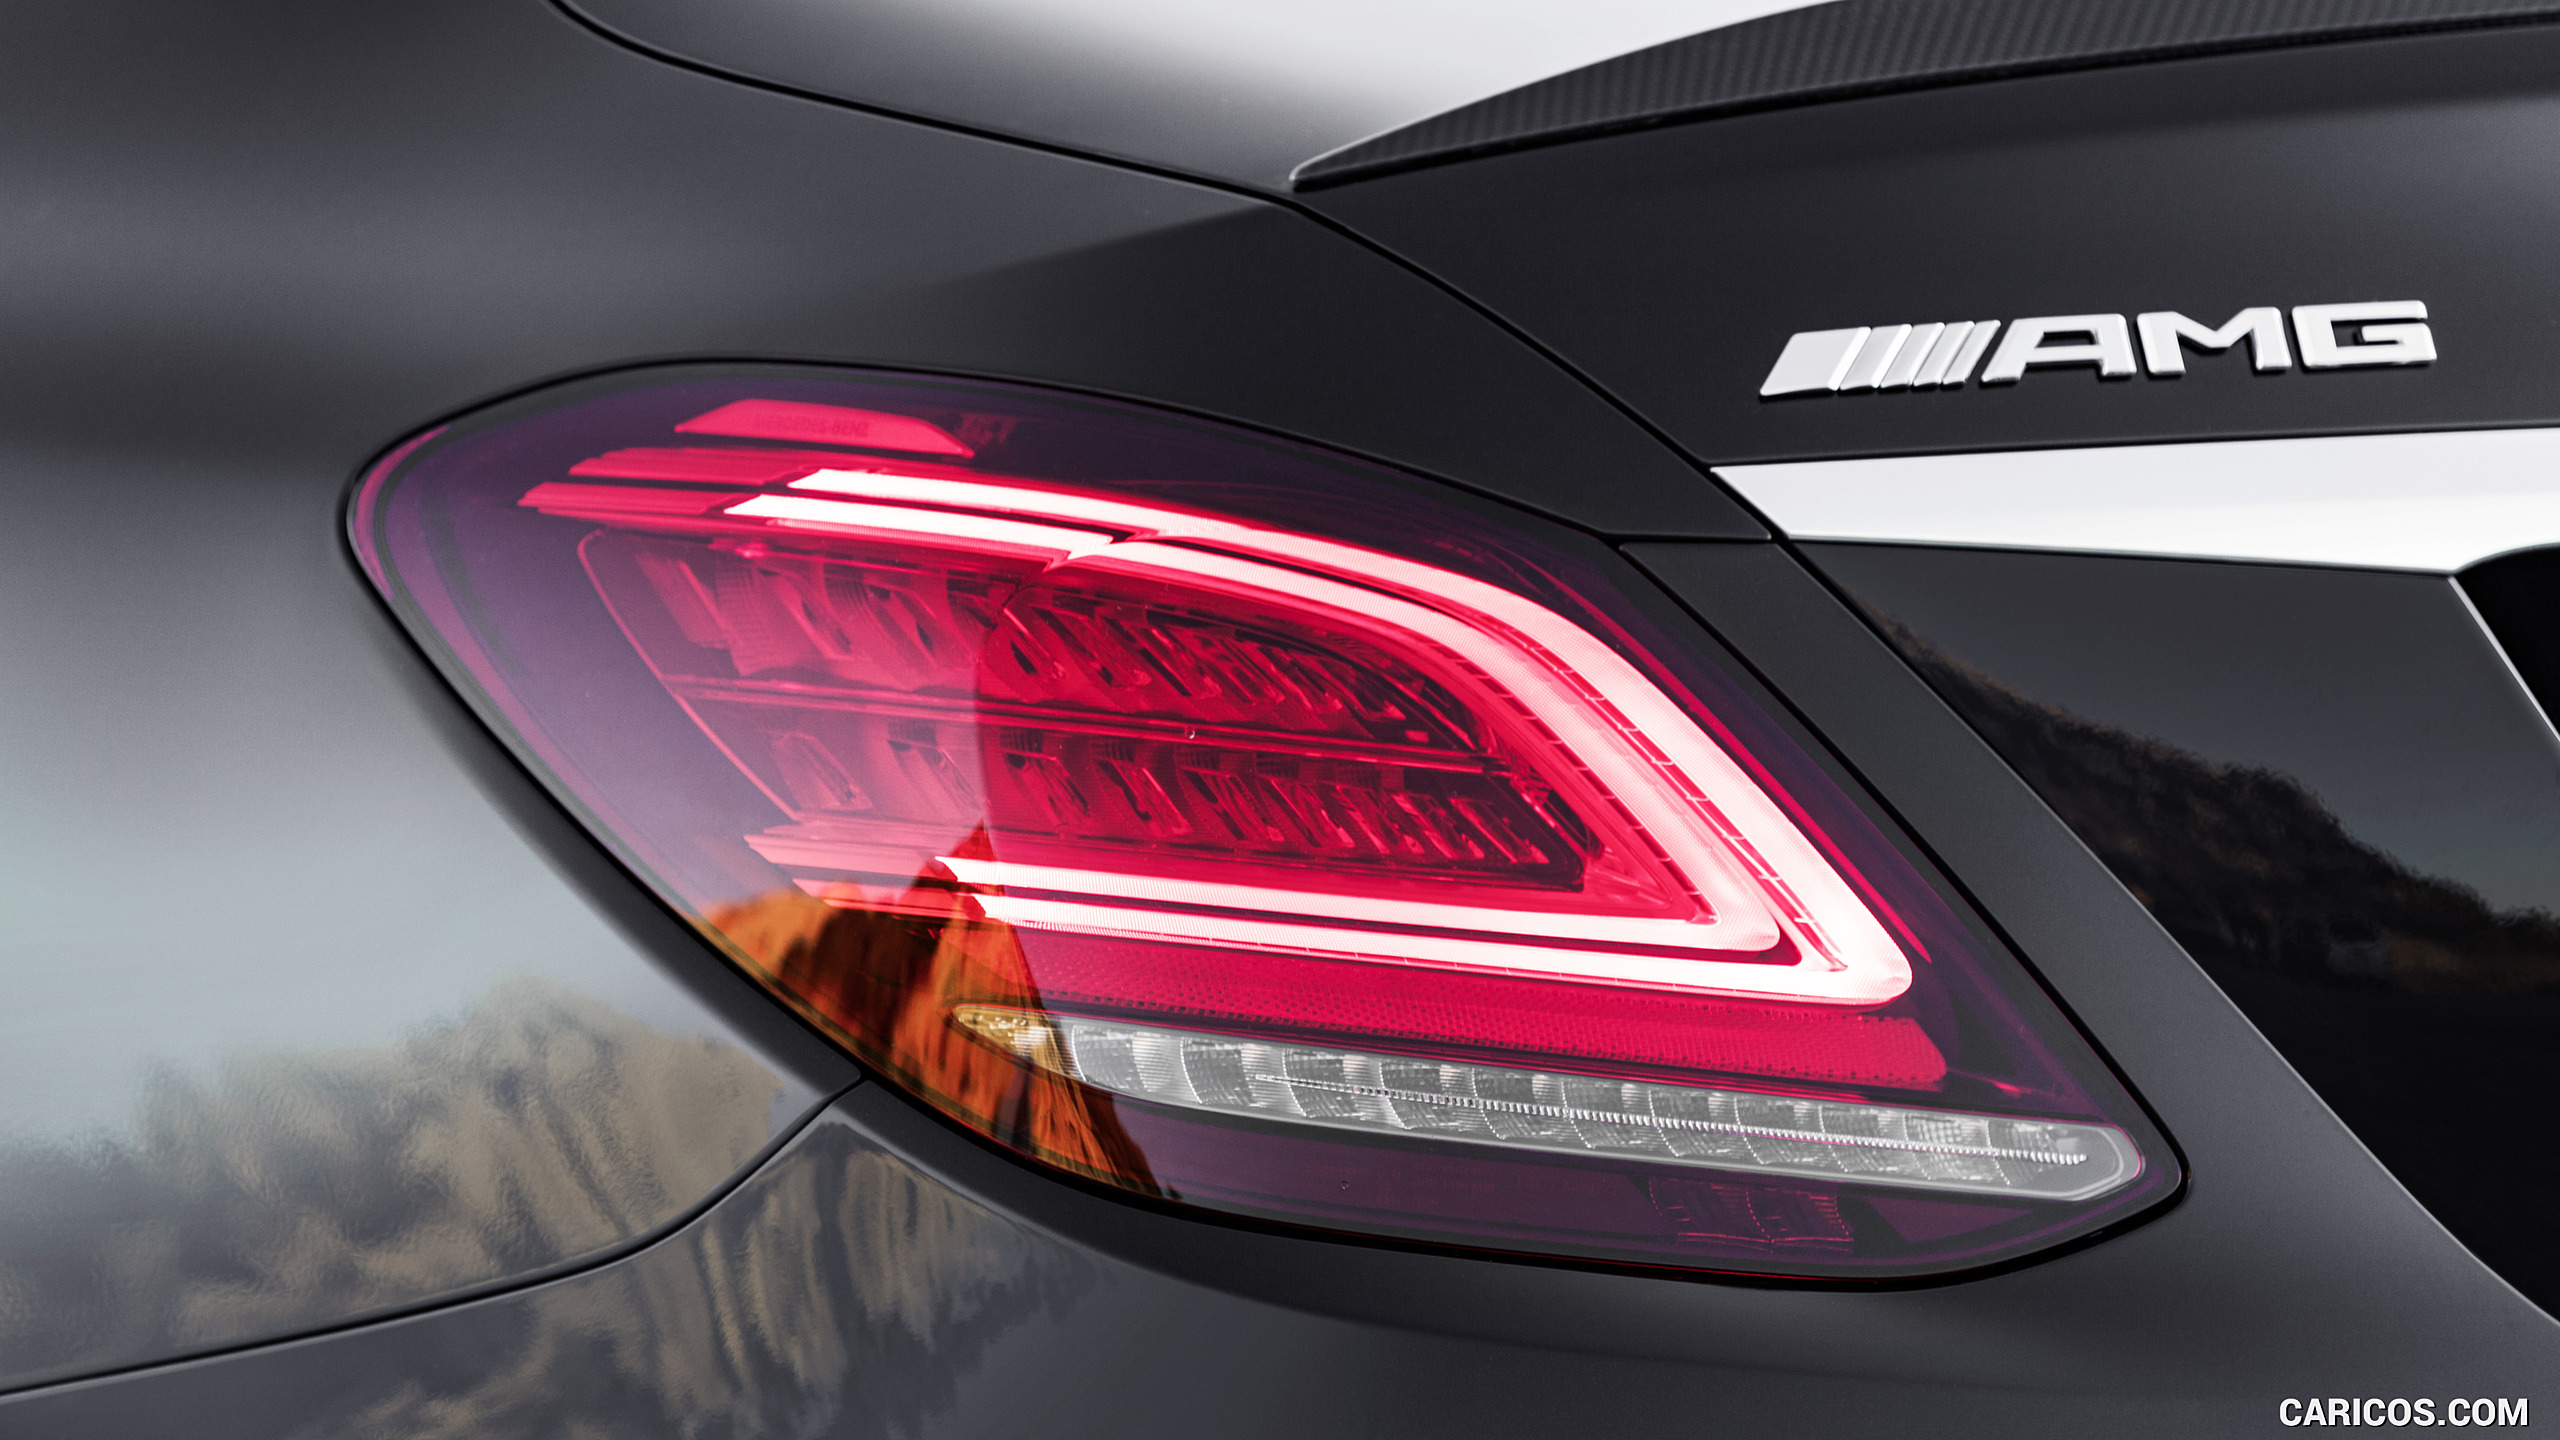 2019 Mercedes-AMG C43 4MATIC - Tail Light, #25 of 192